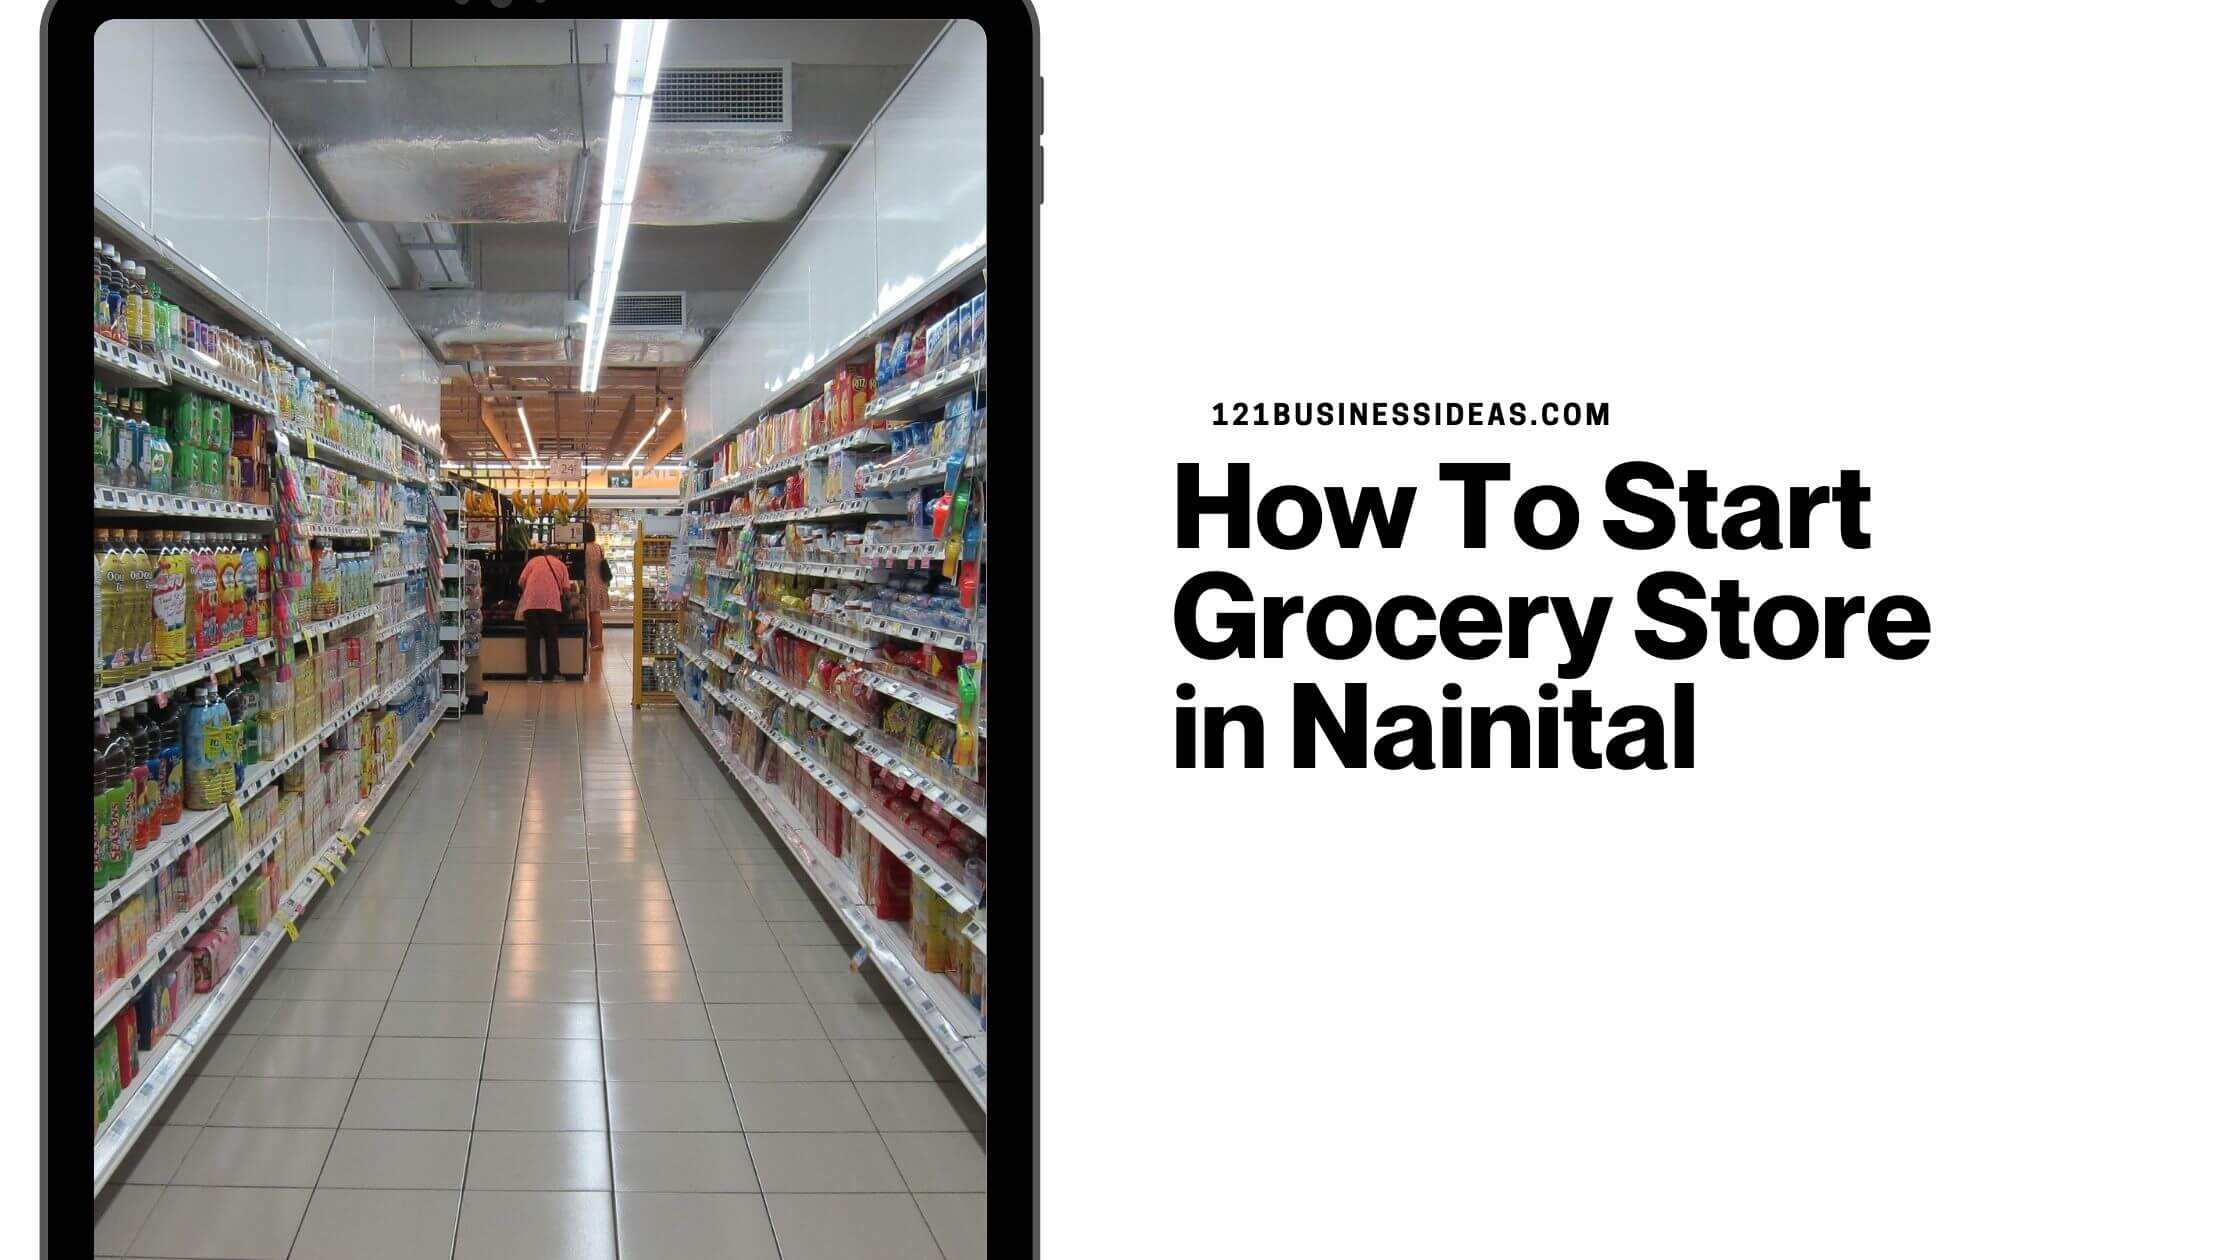 How To Start Grocery Store in Nainital (2) (1)